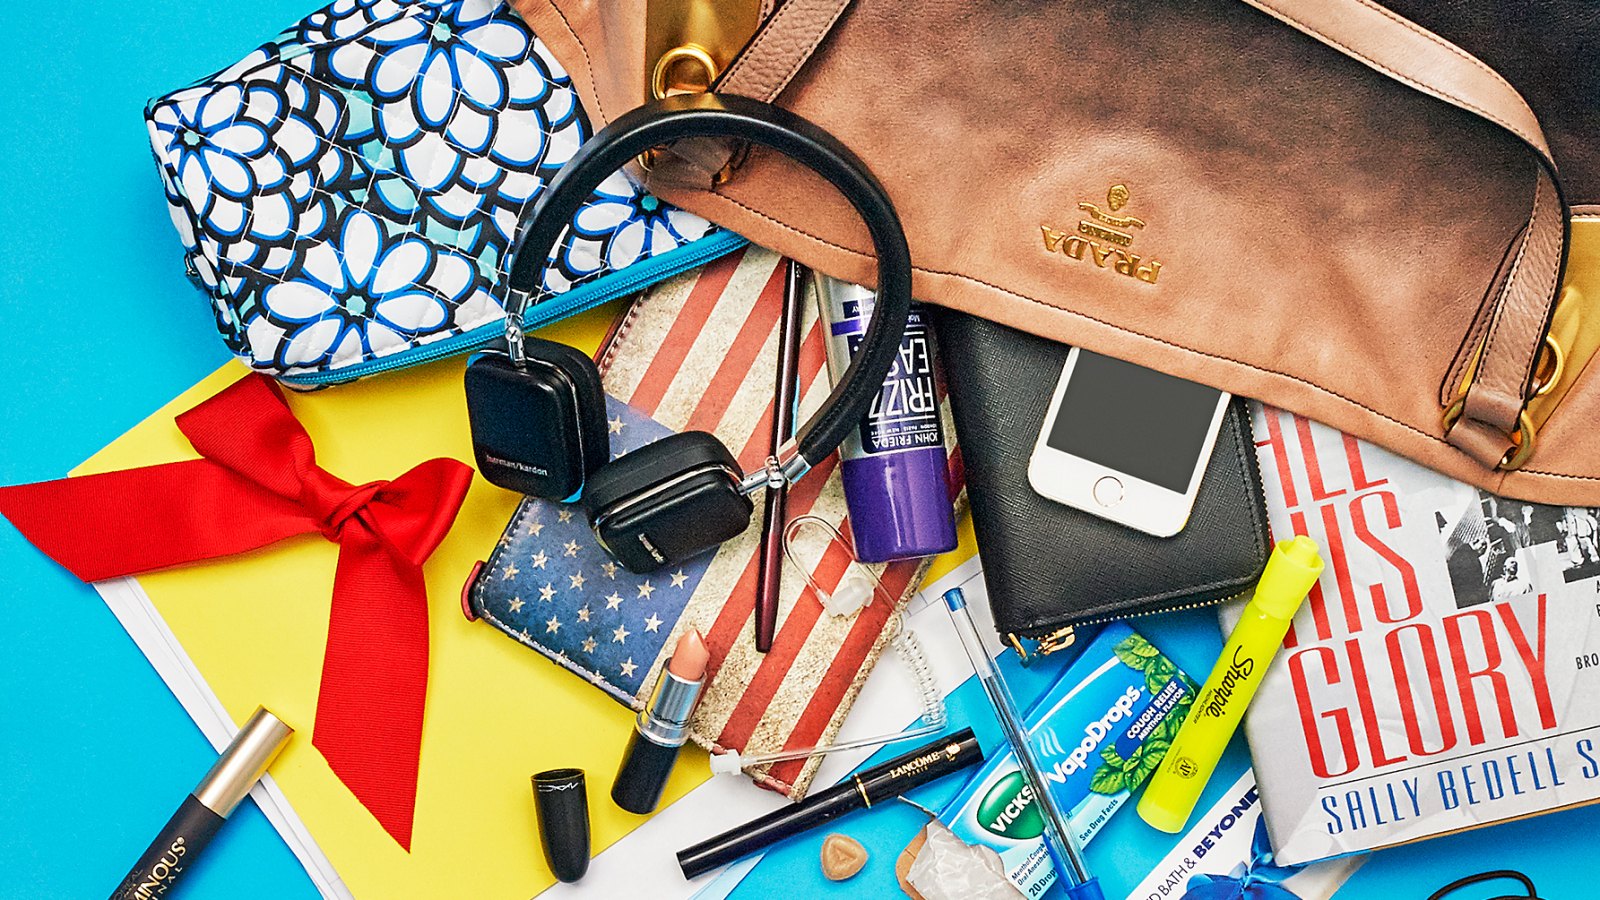 Find out what's in Maria Bartiromo's bag